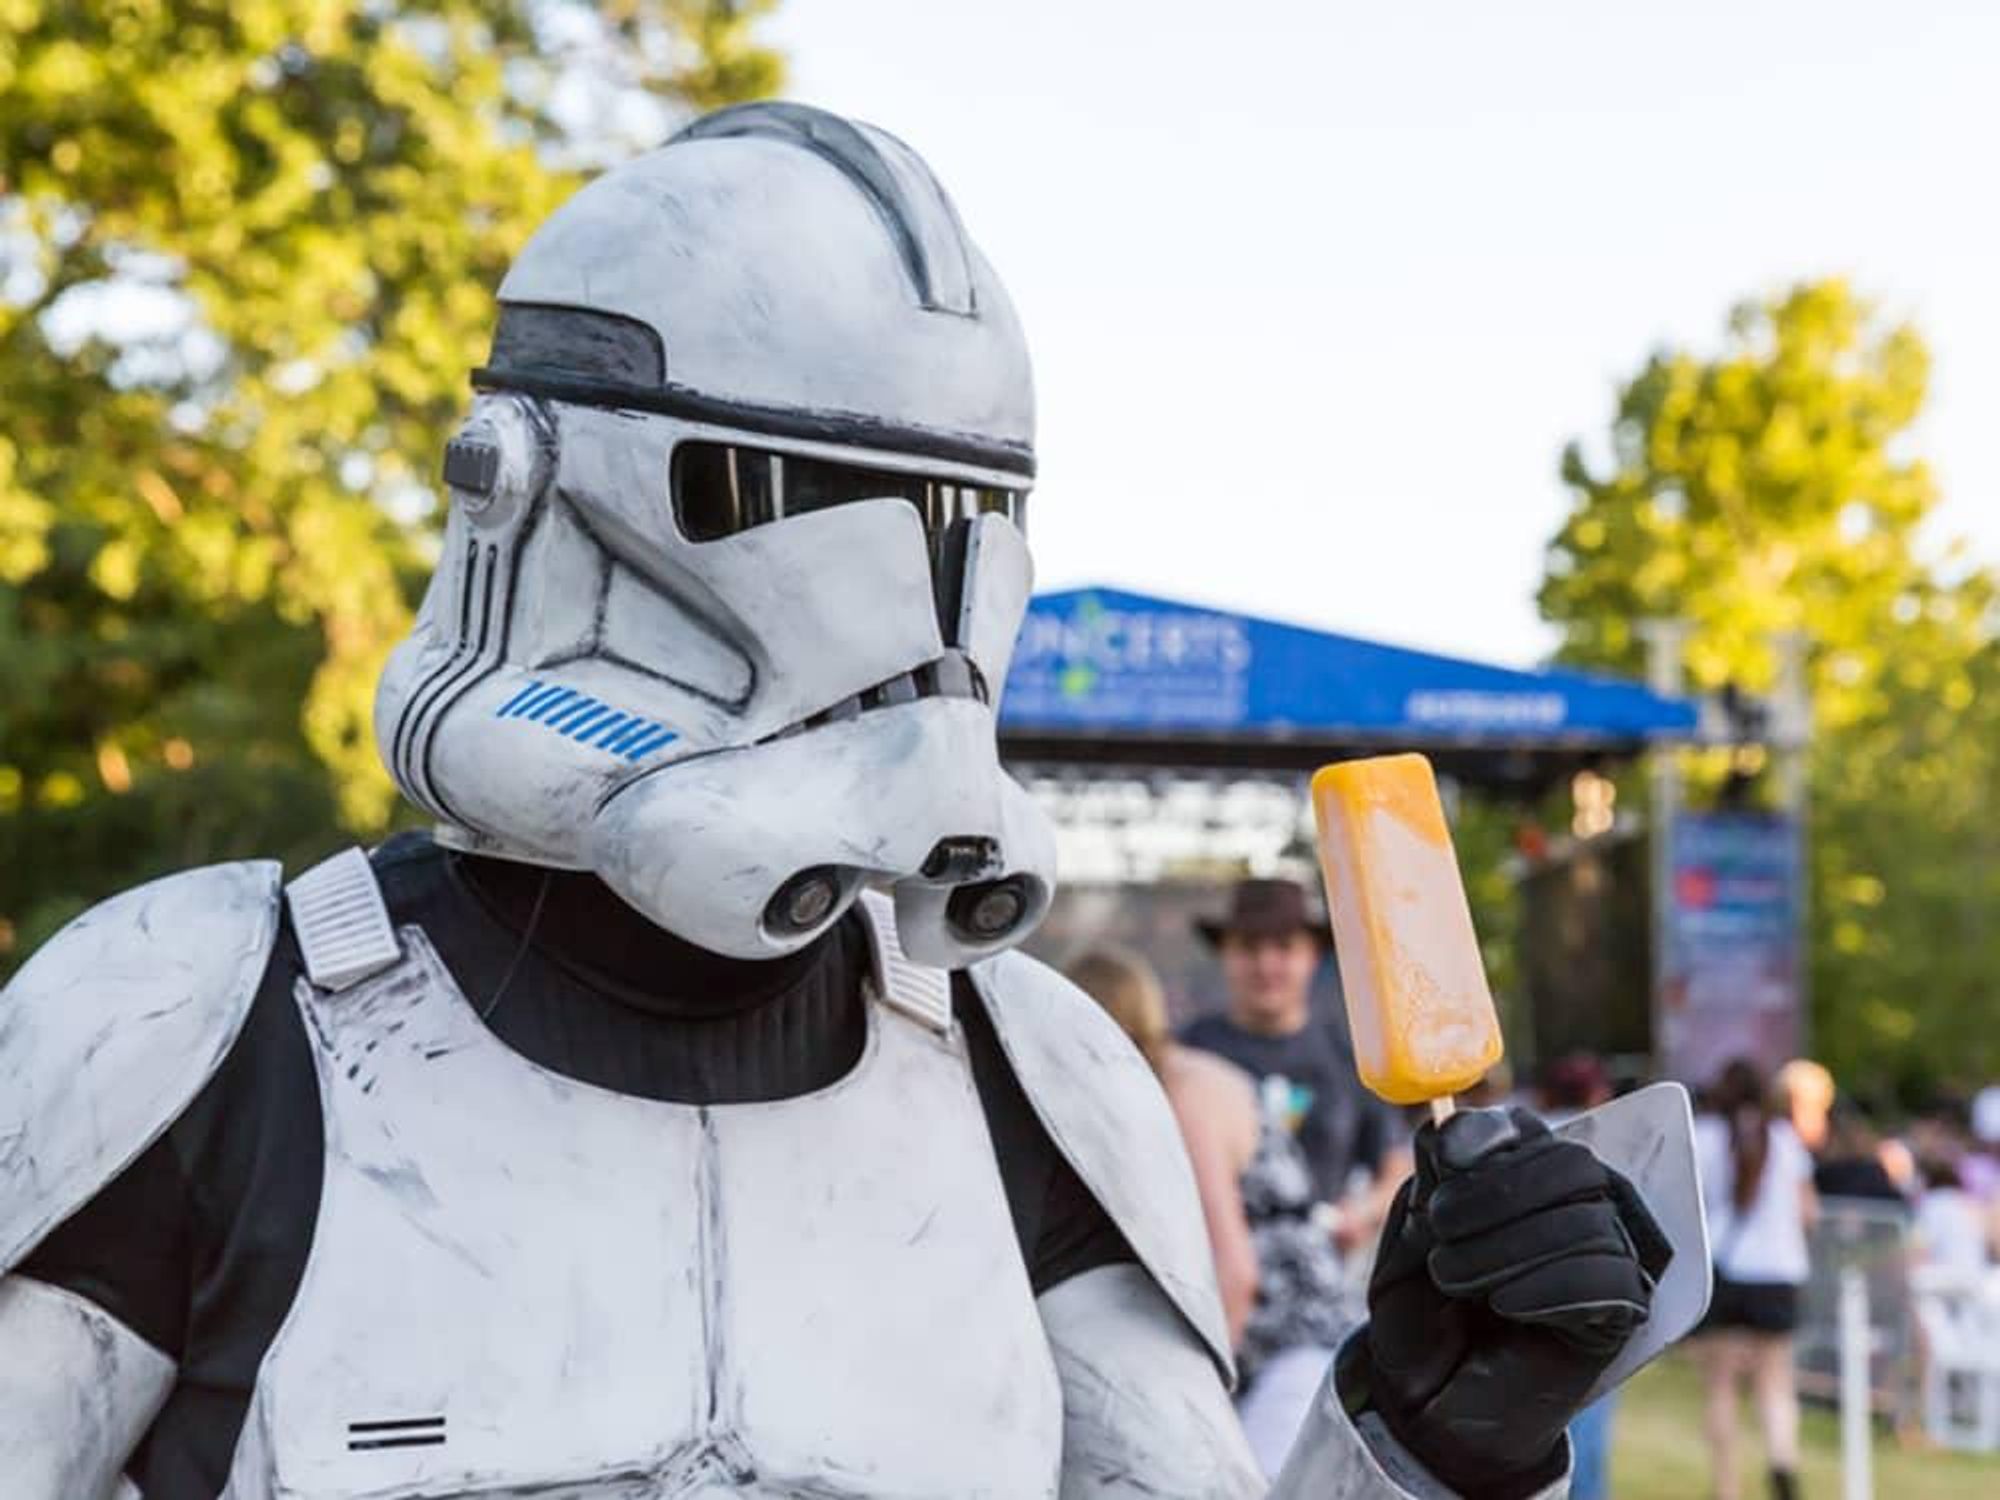 2019 Concerts in the Garden: Star Wars & Beyond: A Sci-Fi Laser Light Spectacular